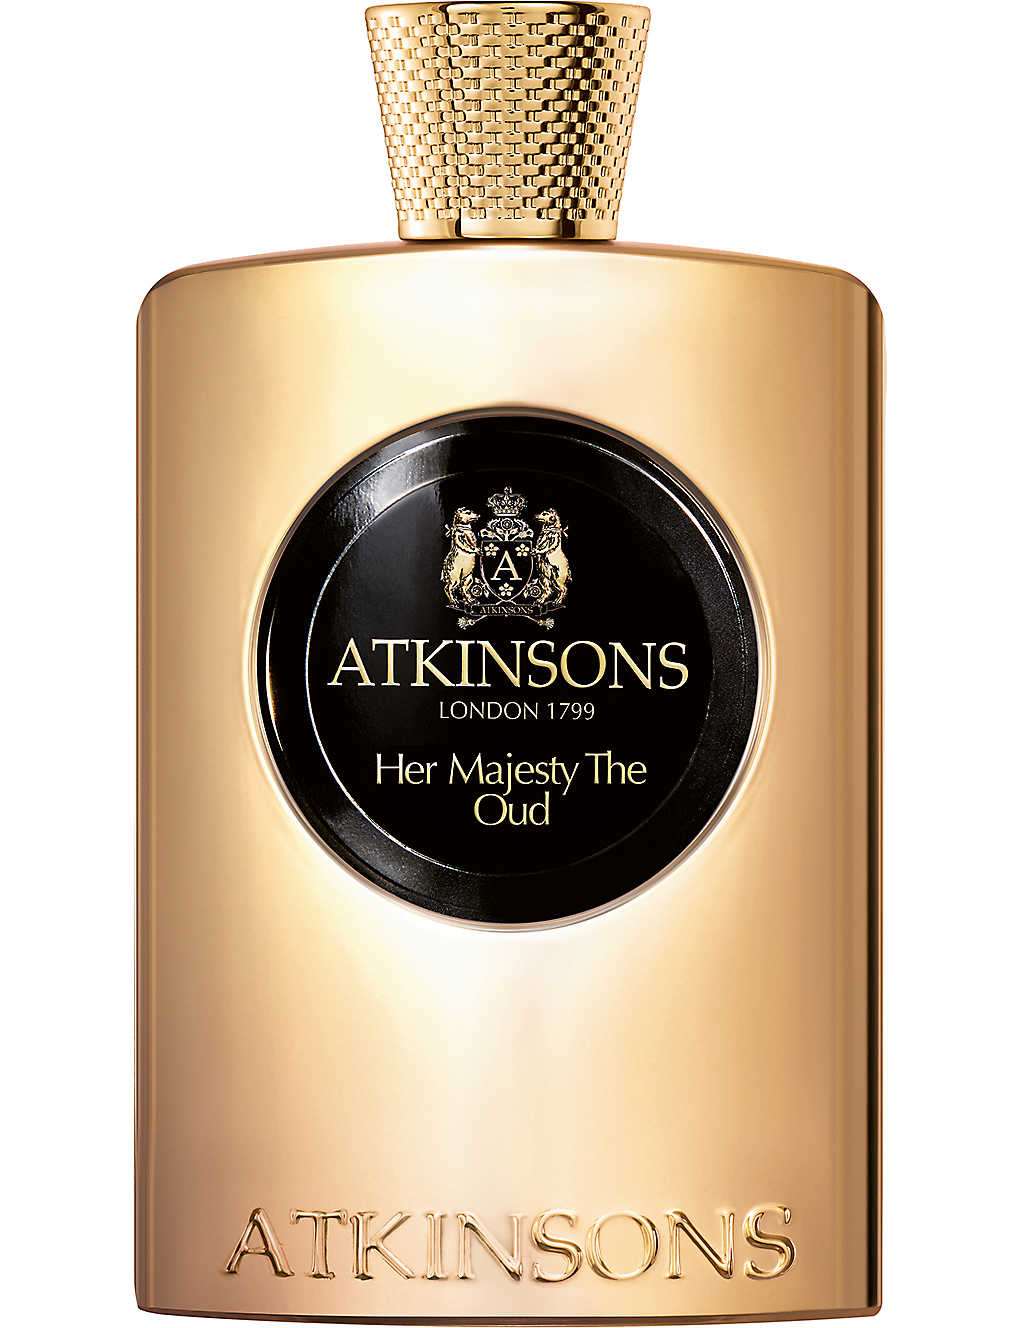 Atkinsons Her Majesty The Oud 100ml incluindo amostras de perfume